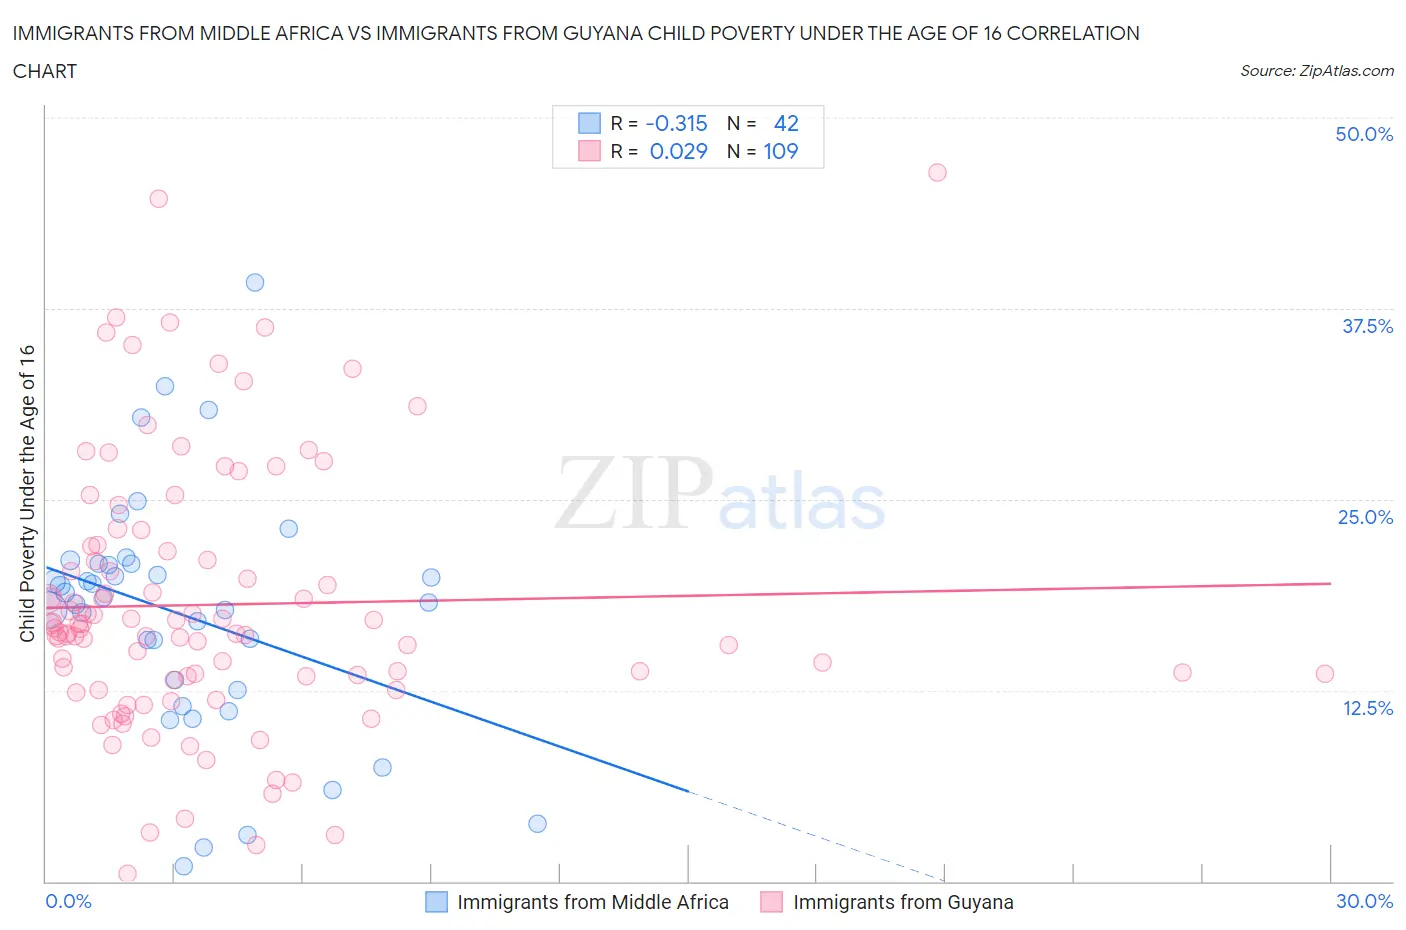 Immigrants from Middle Africa vs Immigrants from Guyana Child Poverty Under the Age of 16